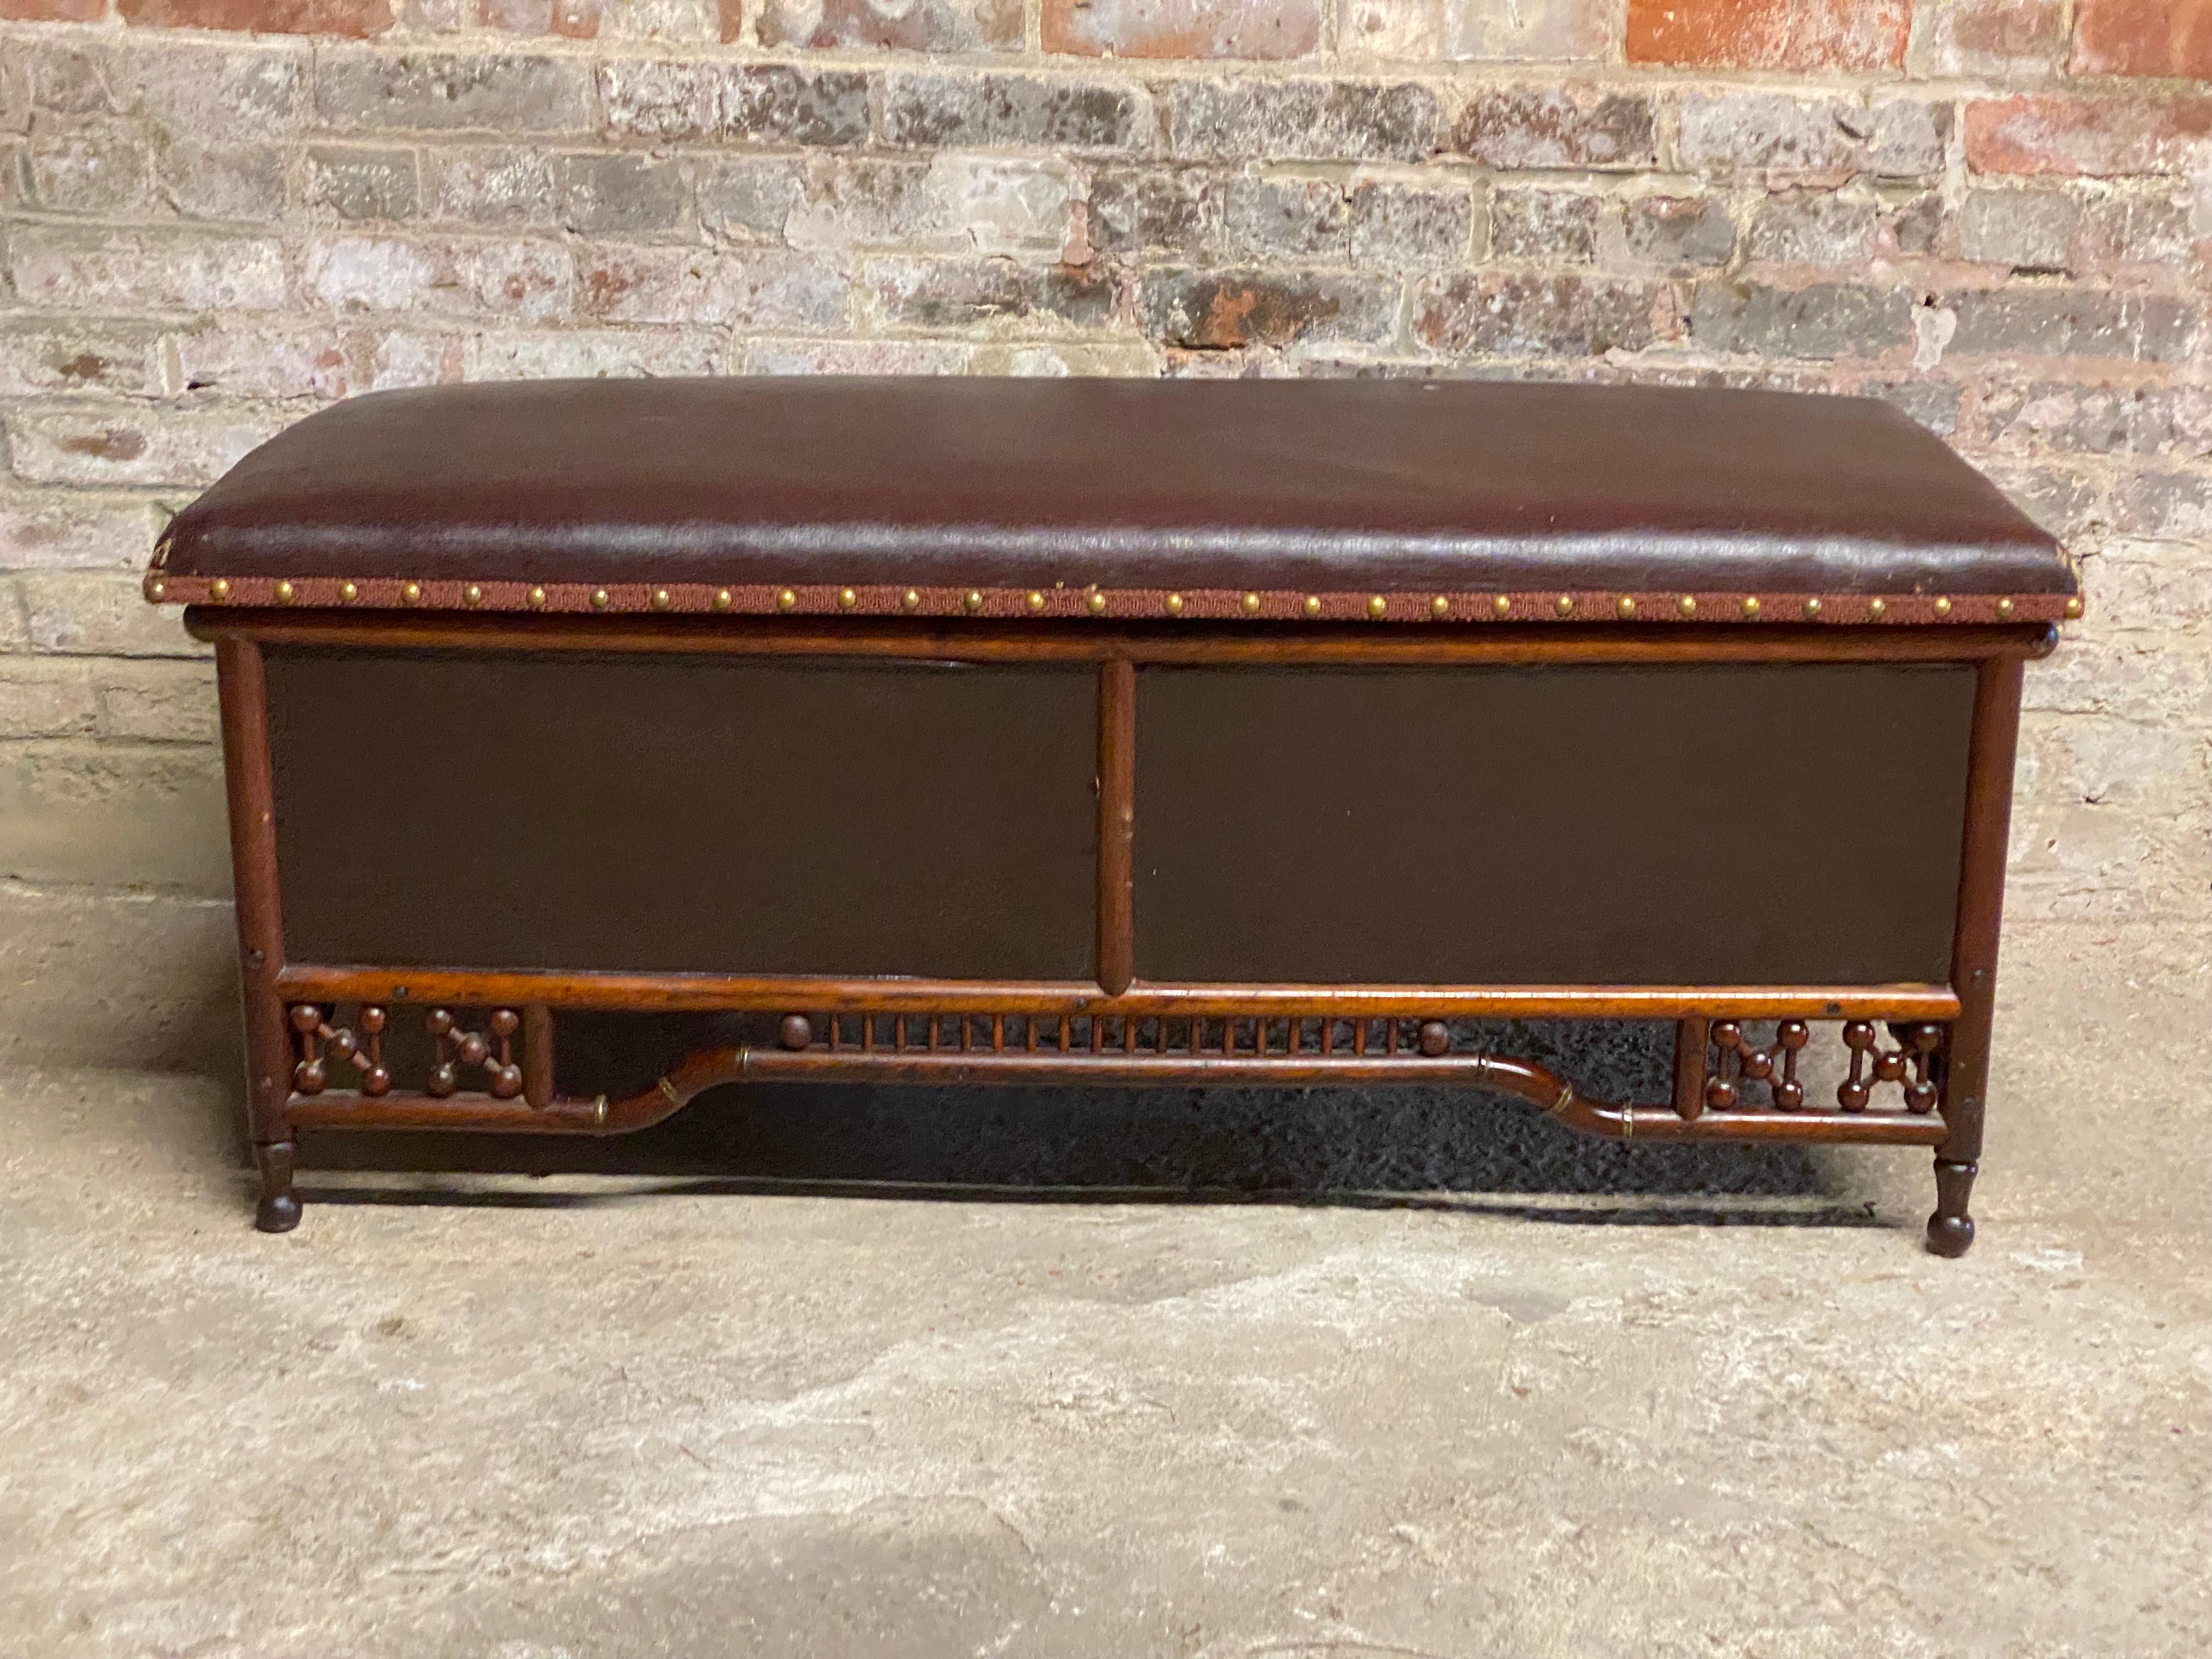 Fine example of a Late Victorian stick and ball blanket chest. Upholstered oilcloth top and textured paneled sides supported by a gorgeous intricate base stick and ball base. The storage compartment is large and deep for multiple items like